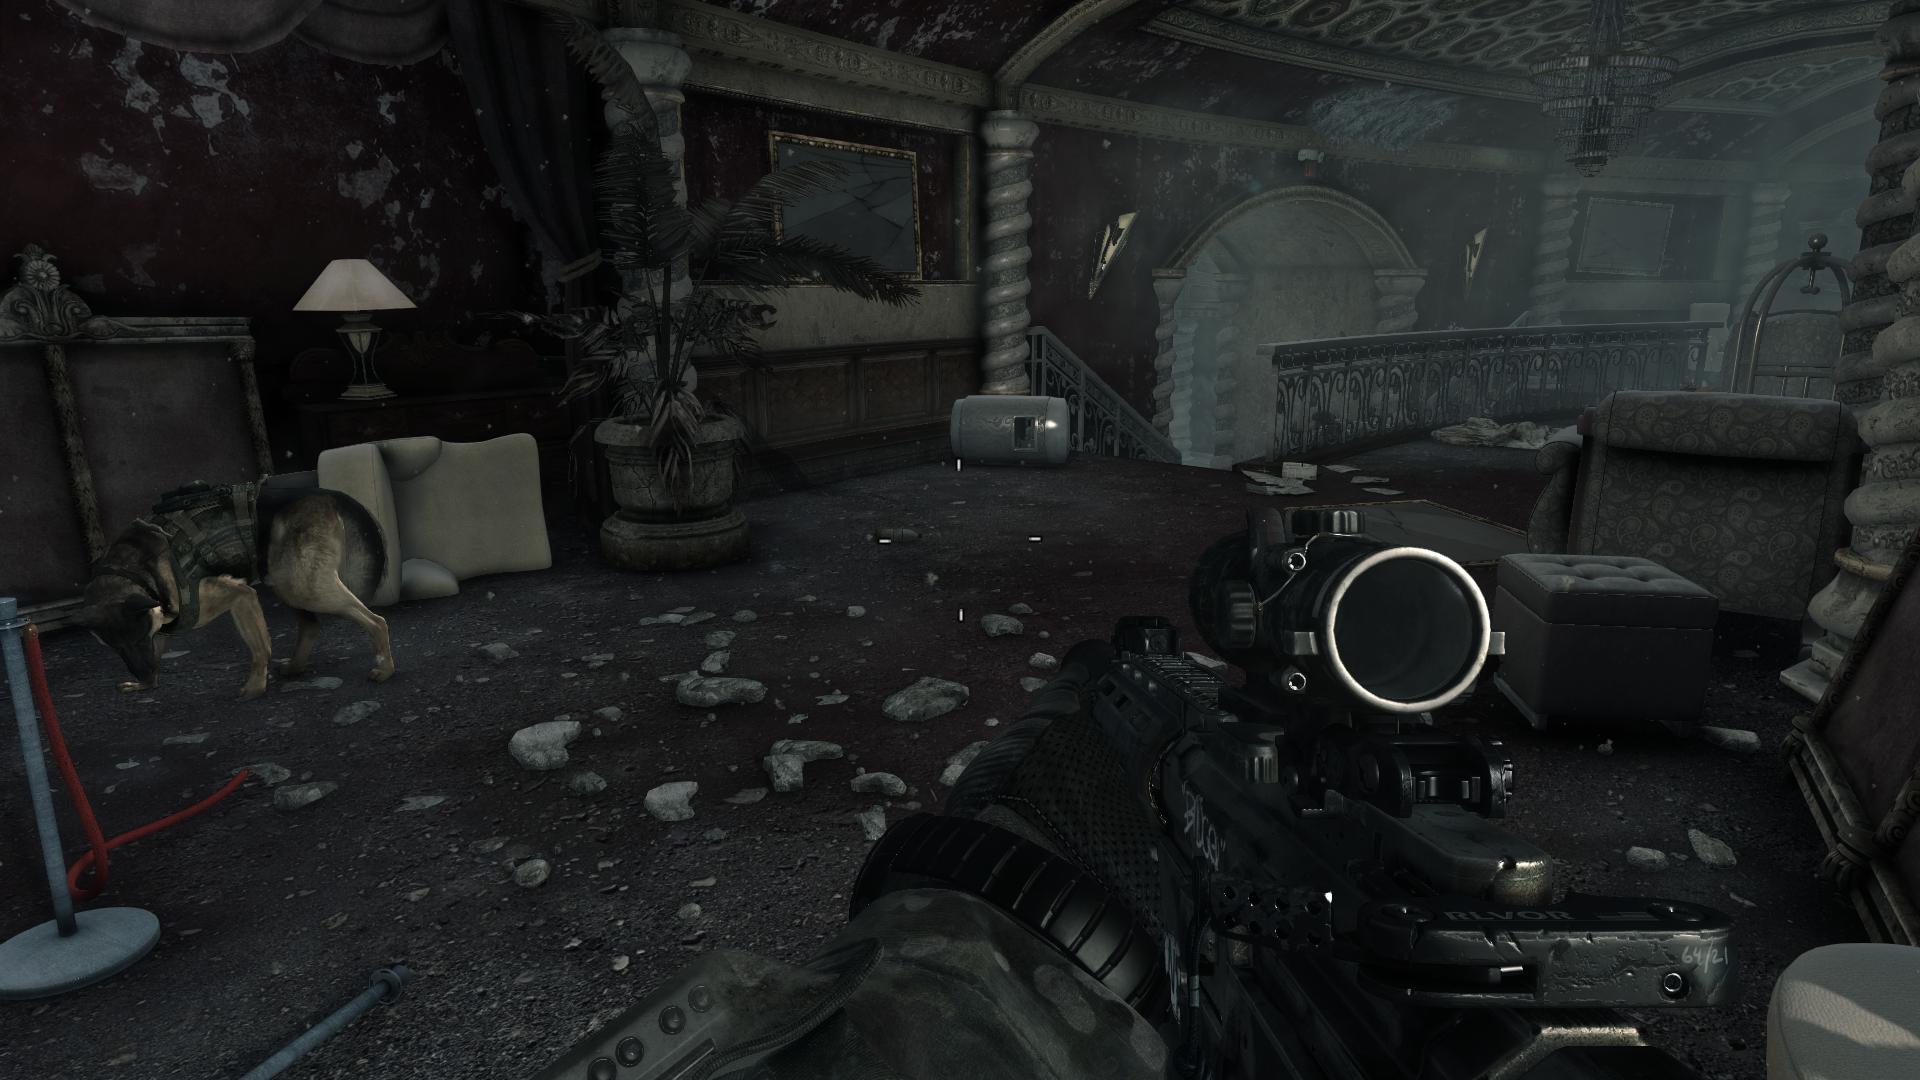 Gaming Impressions from a PC Perspective - Call of Duty Ghosts